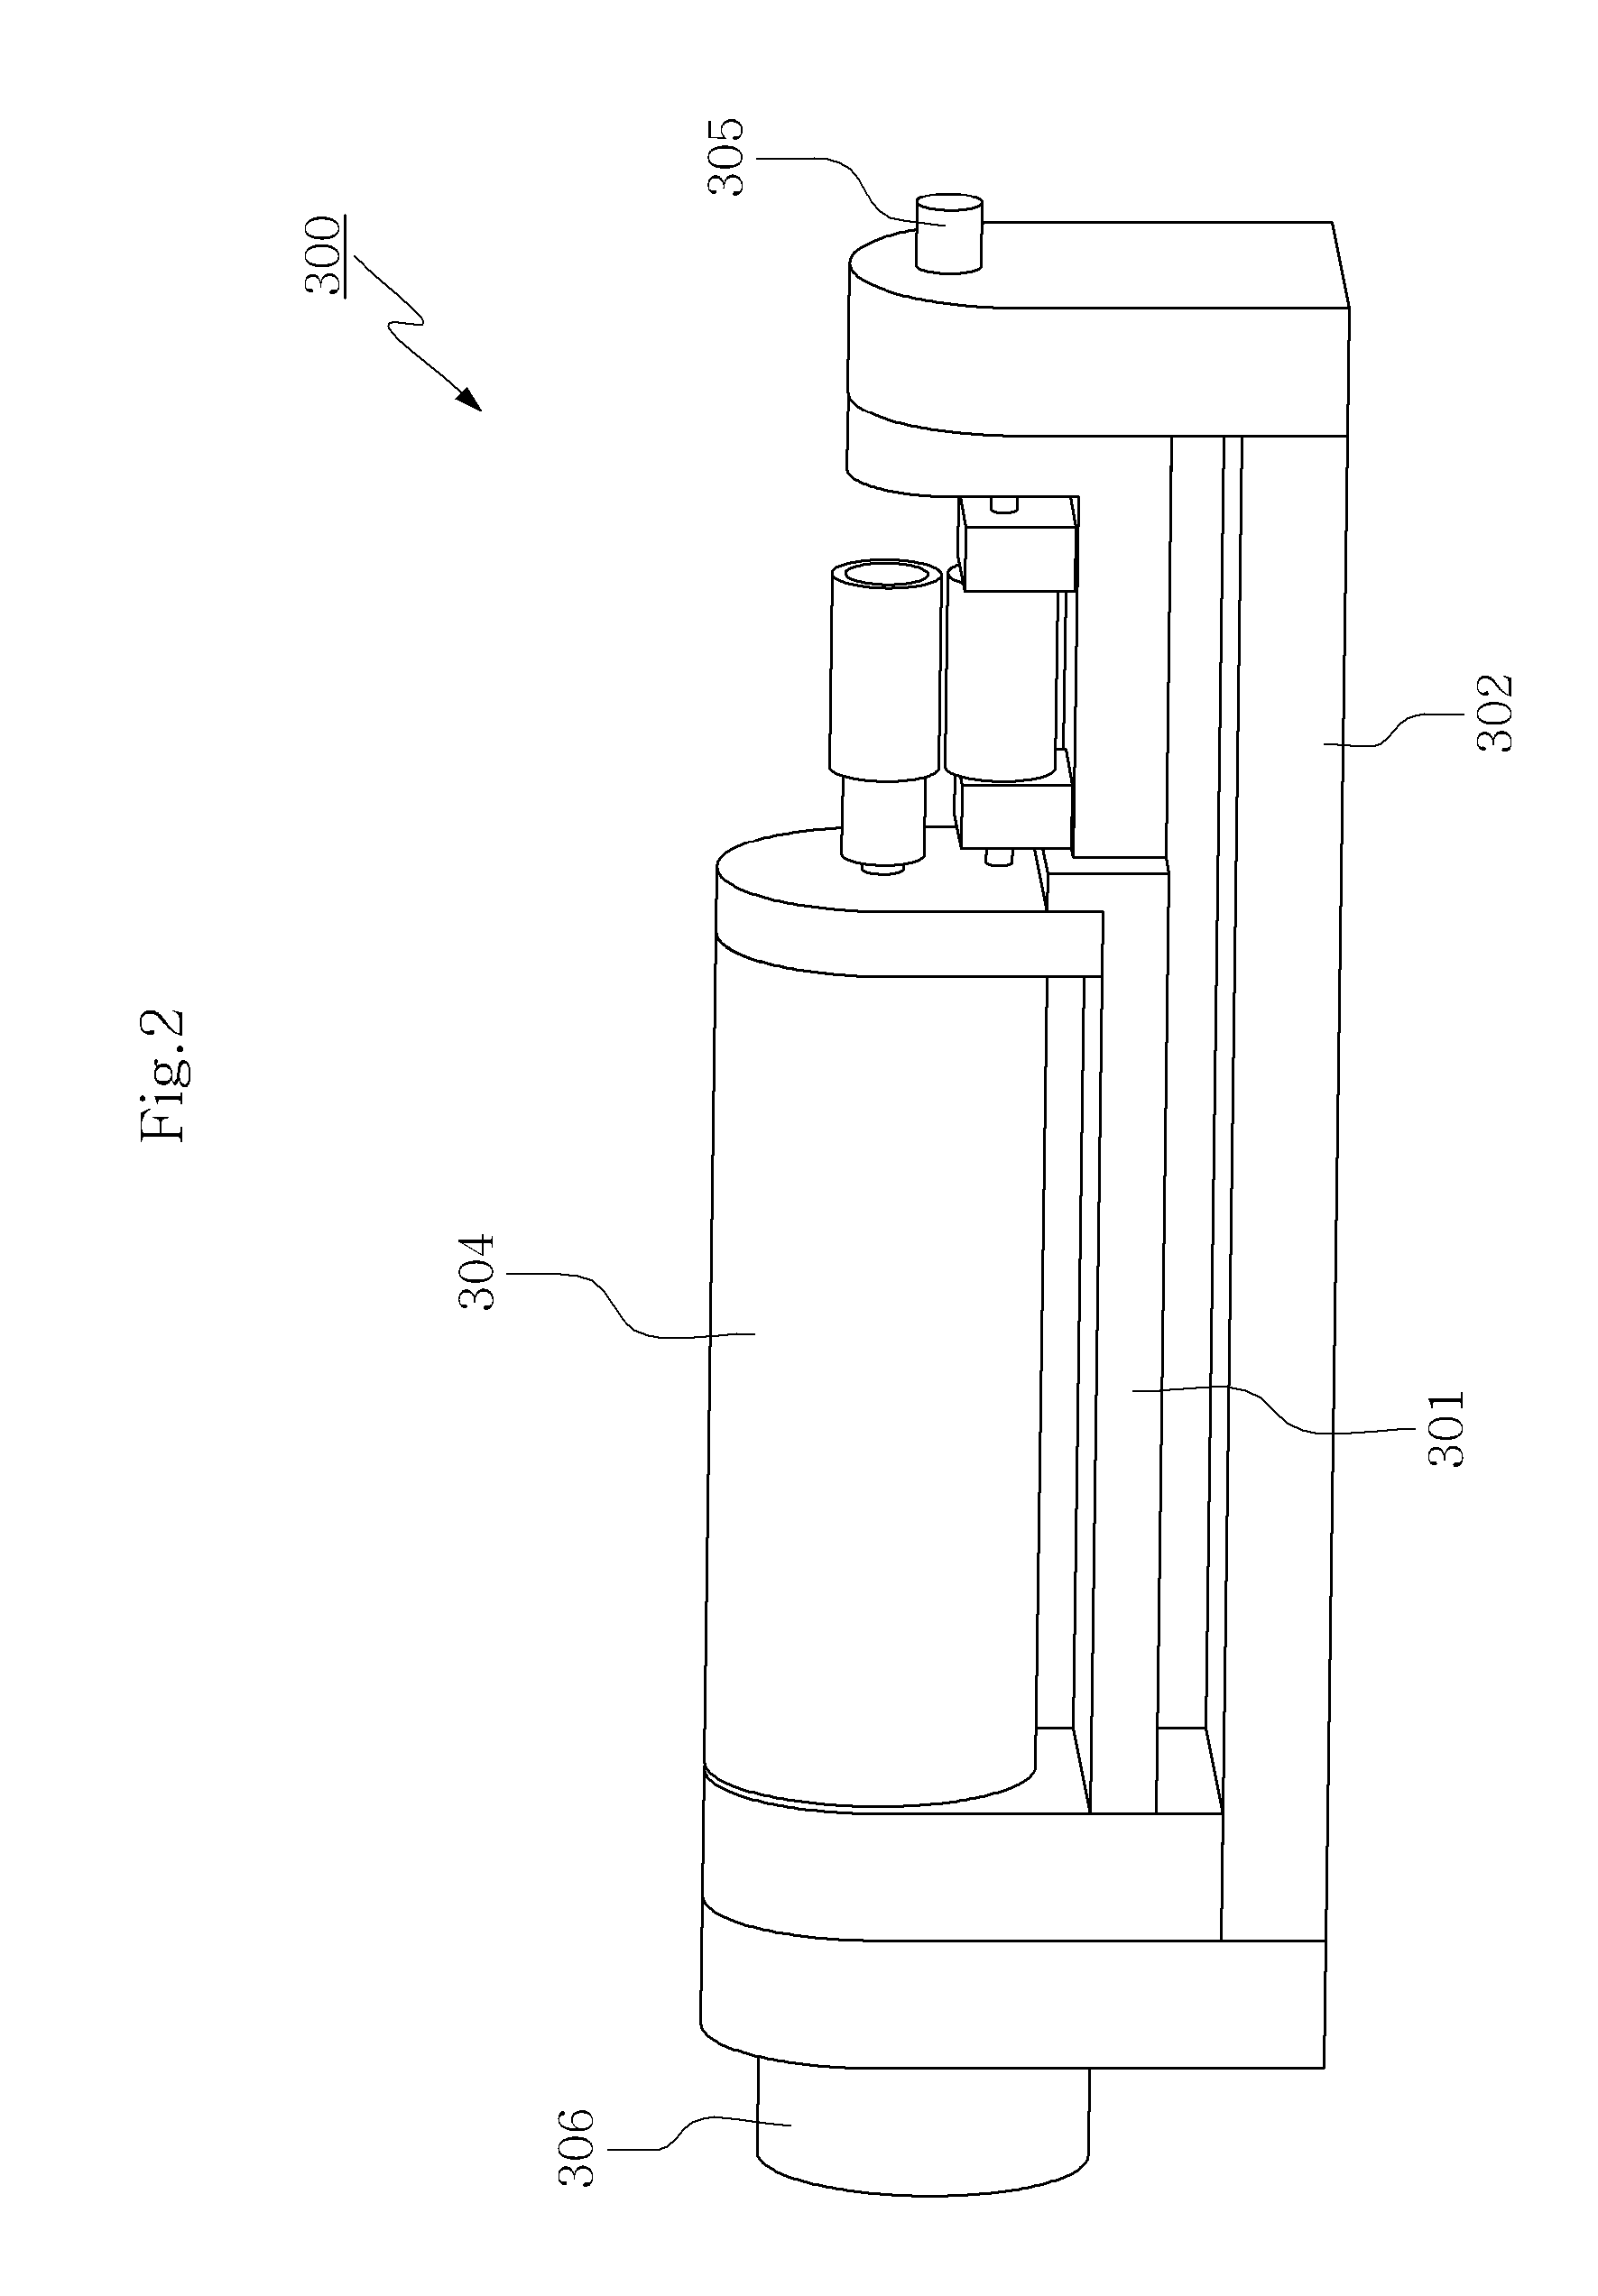 Injection simulation system and method